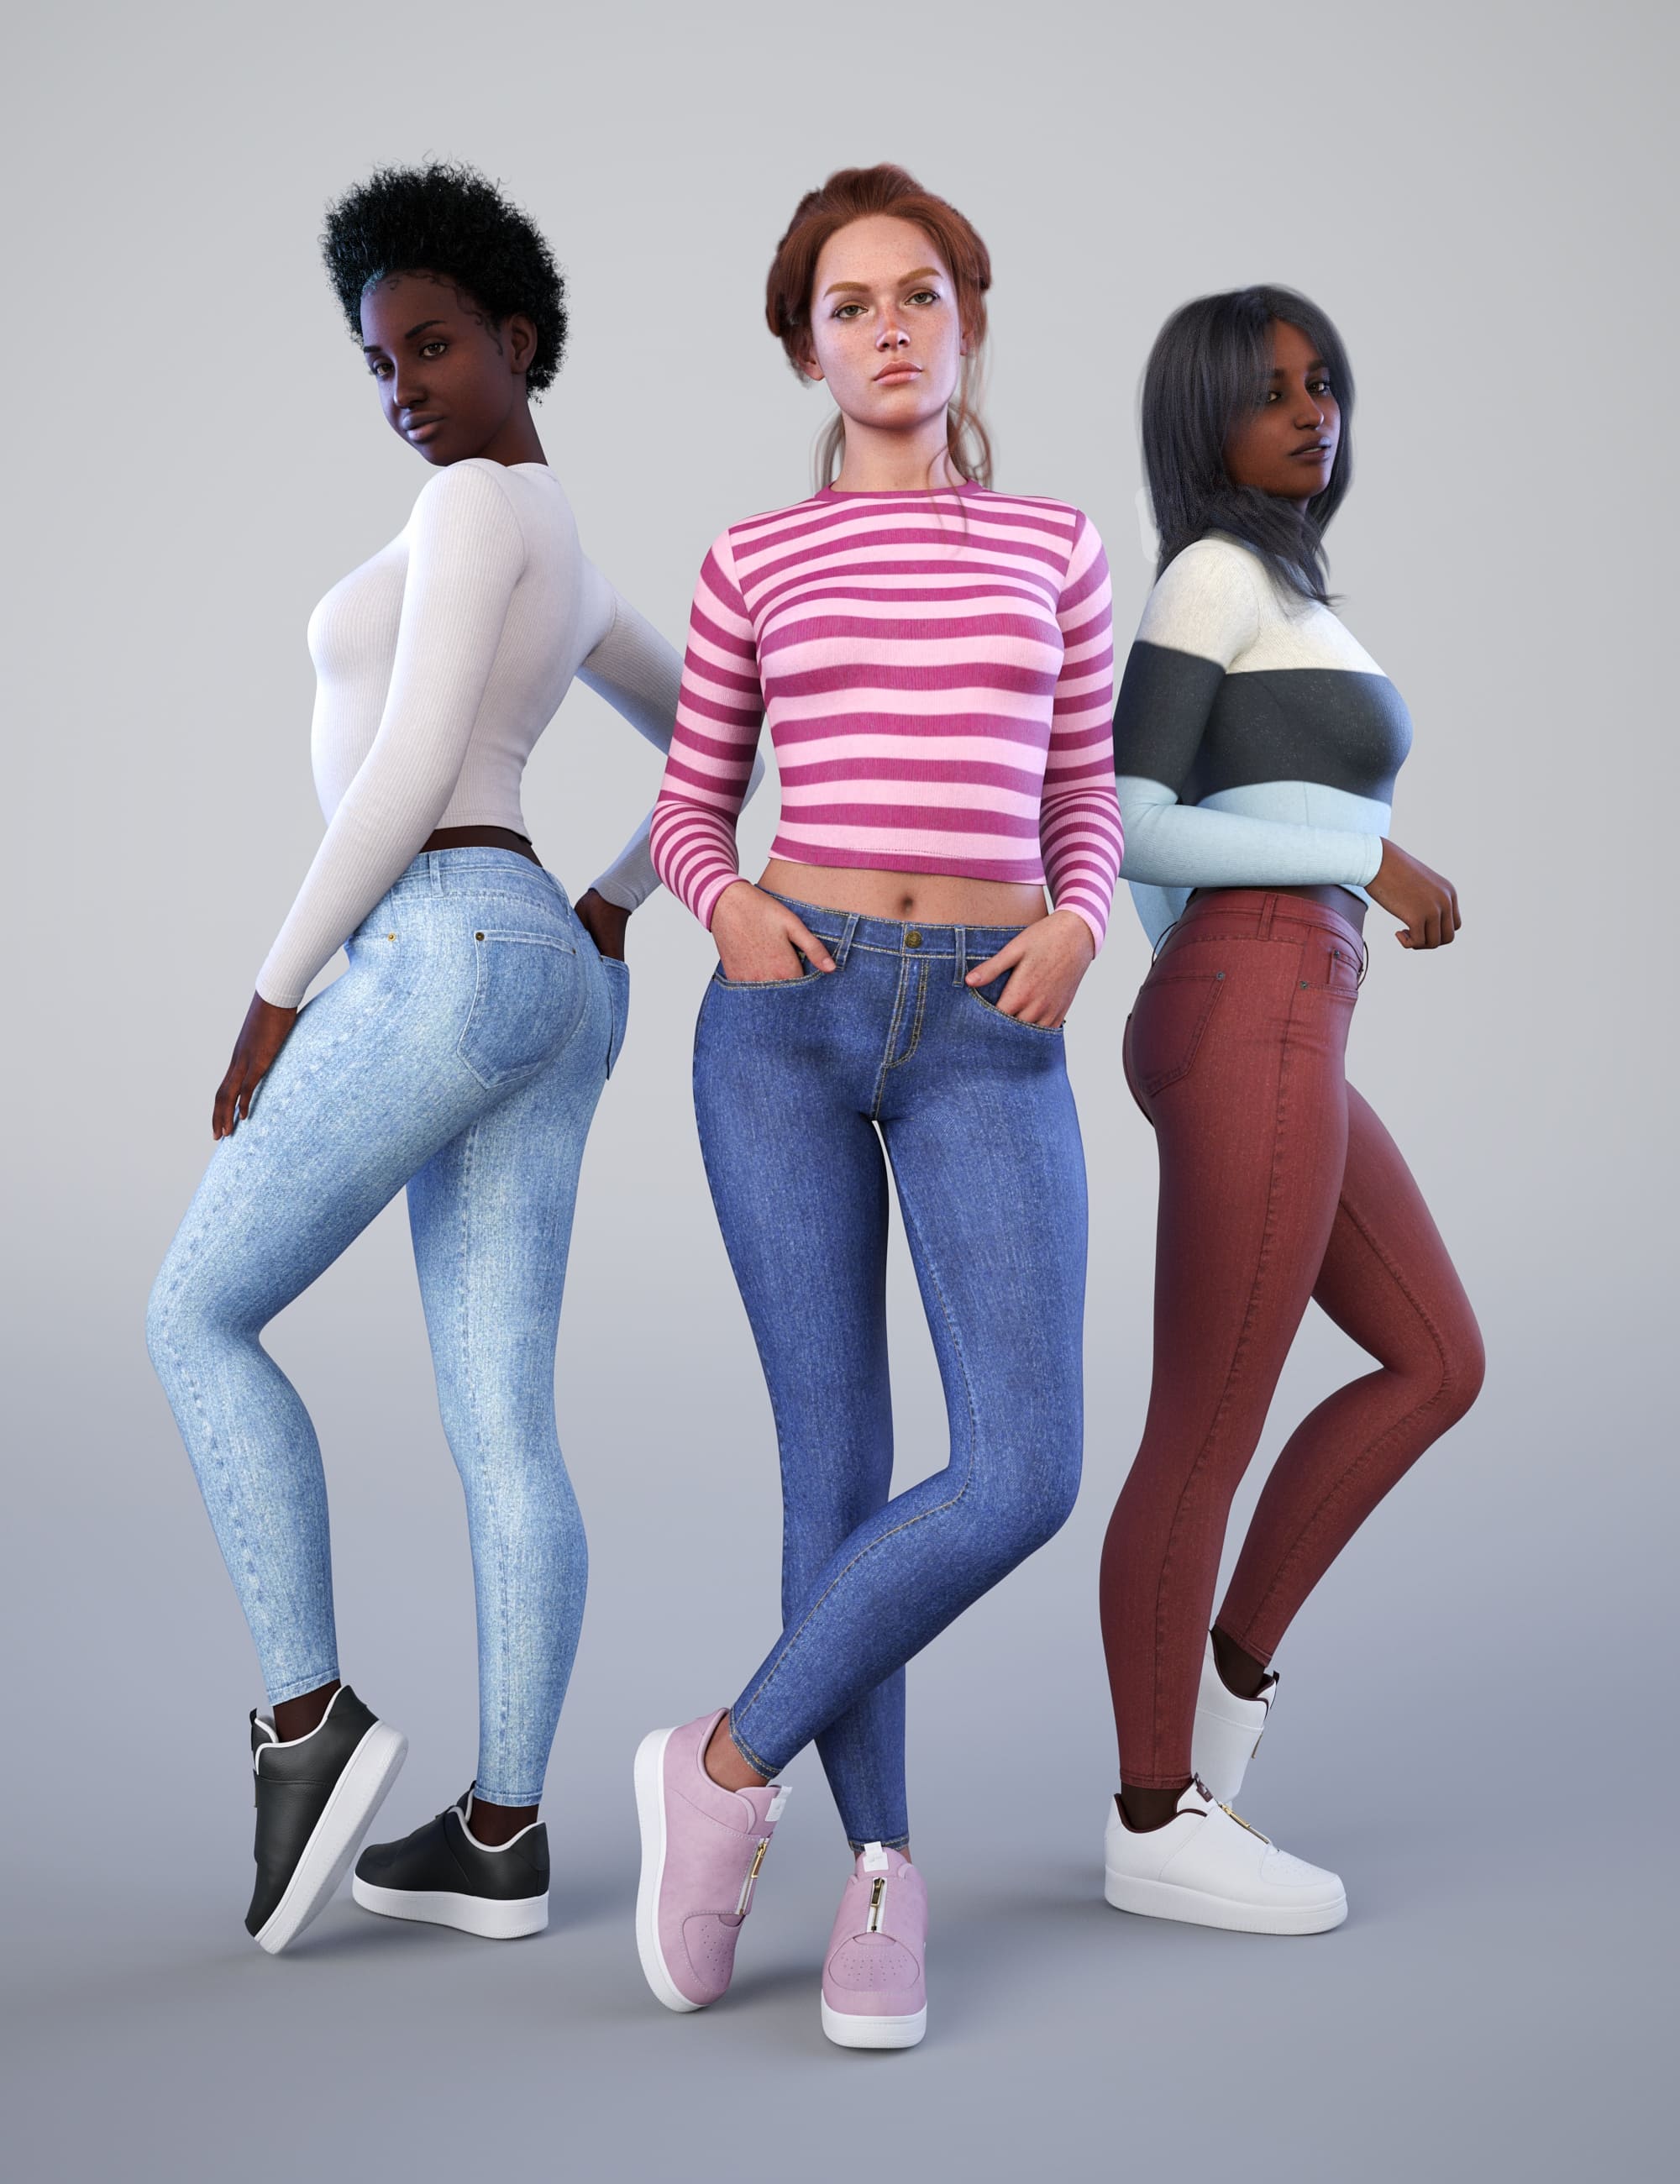 30+ Of the Best Custom Poses For The Sims 4